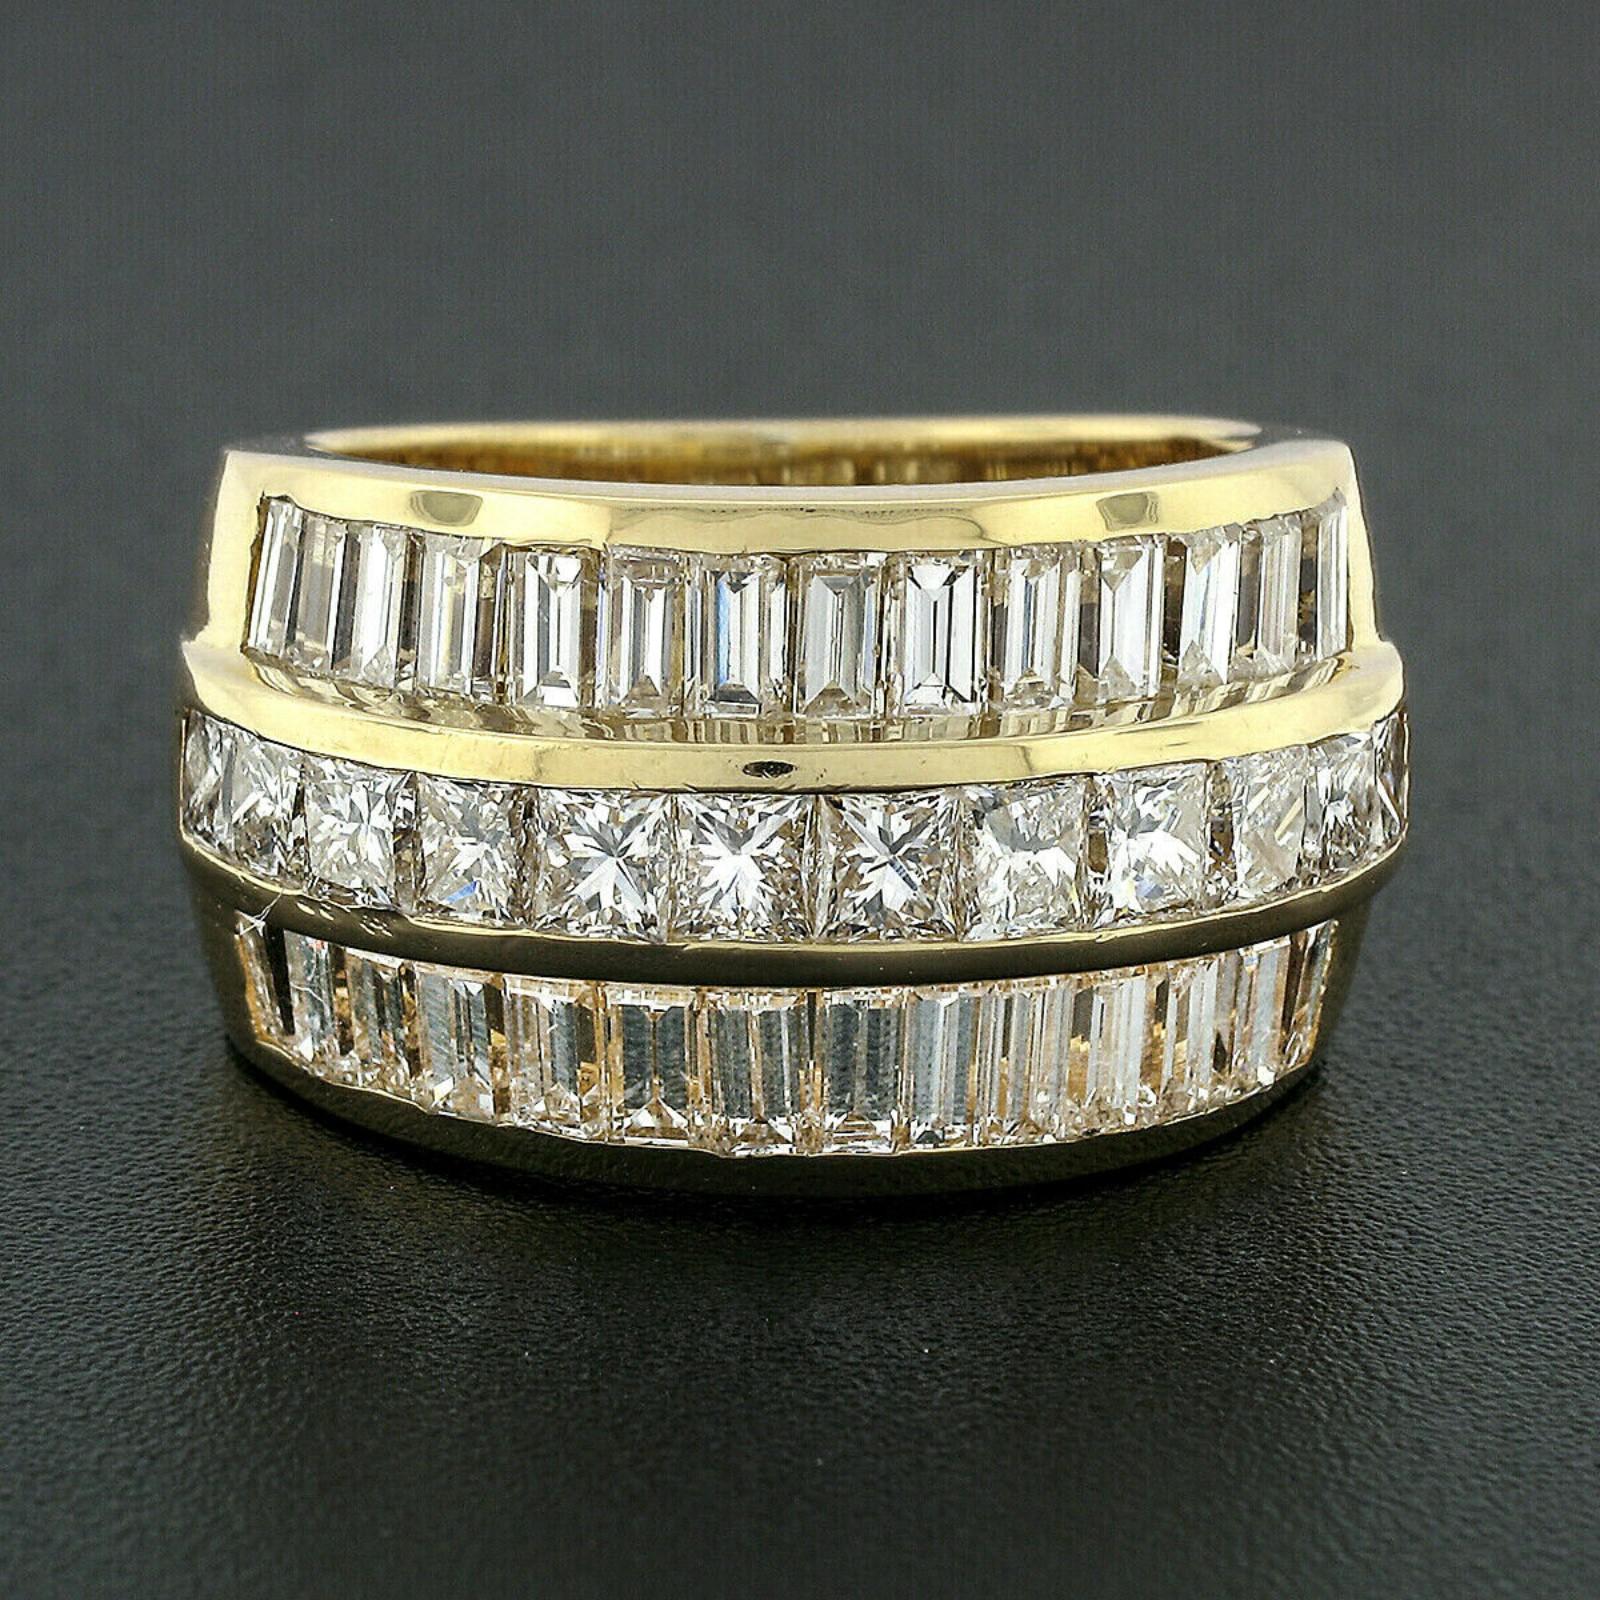 This is a super impressive, vintage statement band ring crafted in solid 18k yellow gold featuring 3 rows of magnificent diamonds across its solidly made triple channel design. The center row is slightly raised above the outer borders, showcasing 12